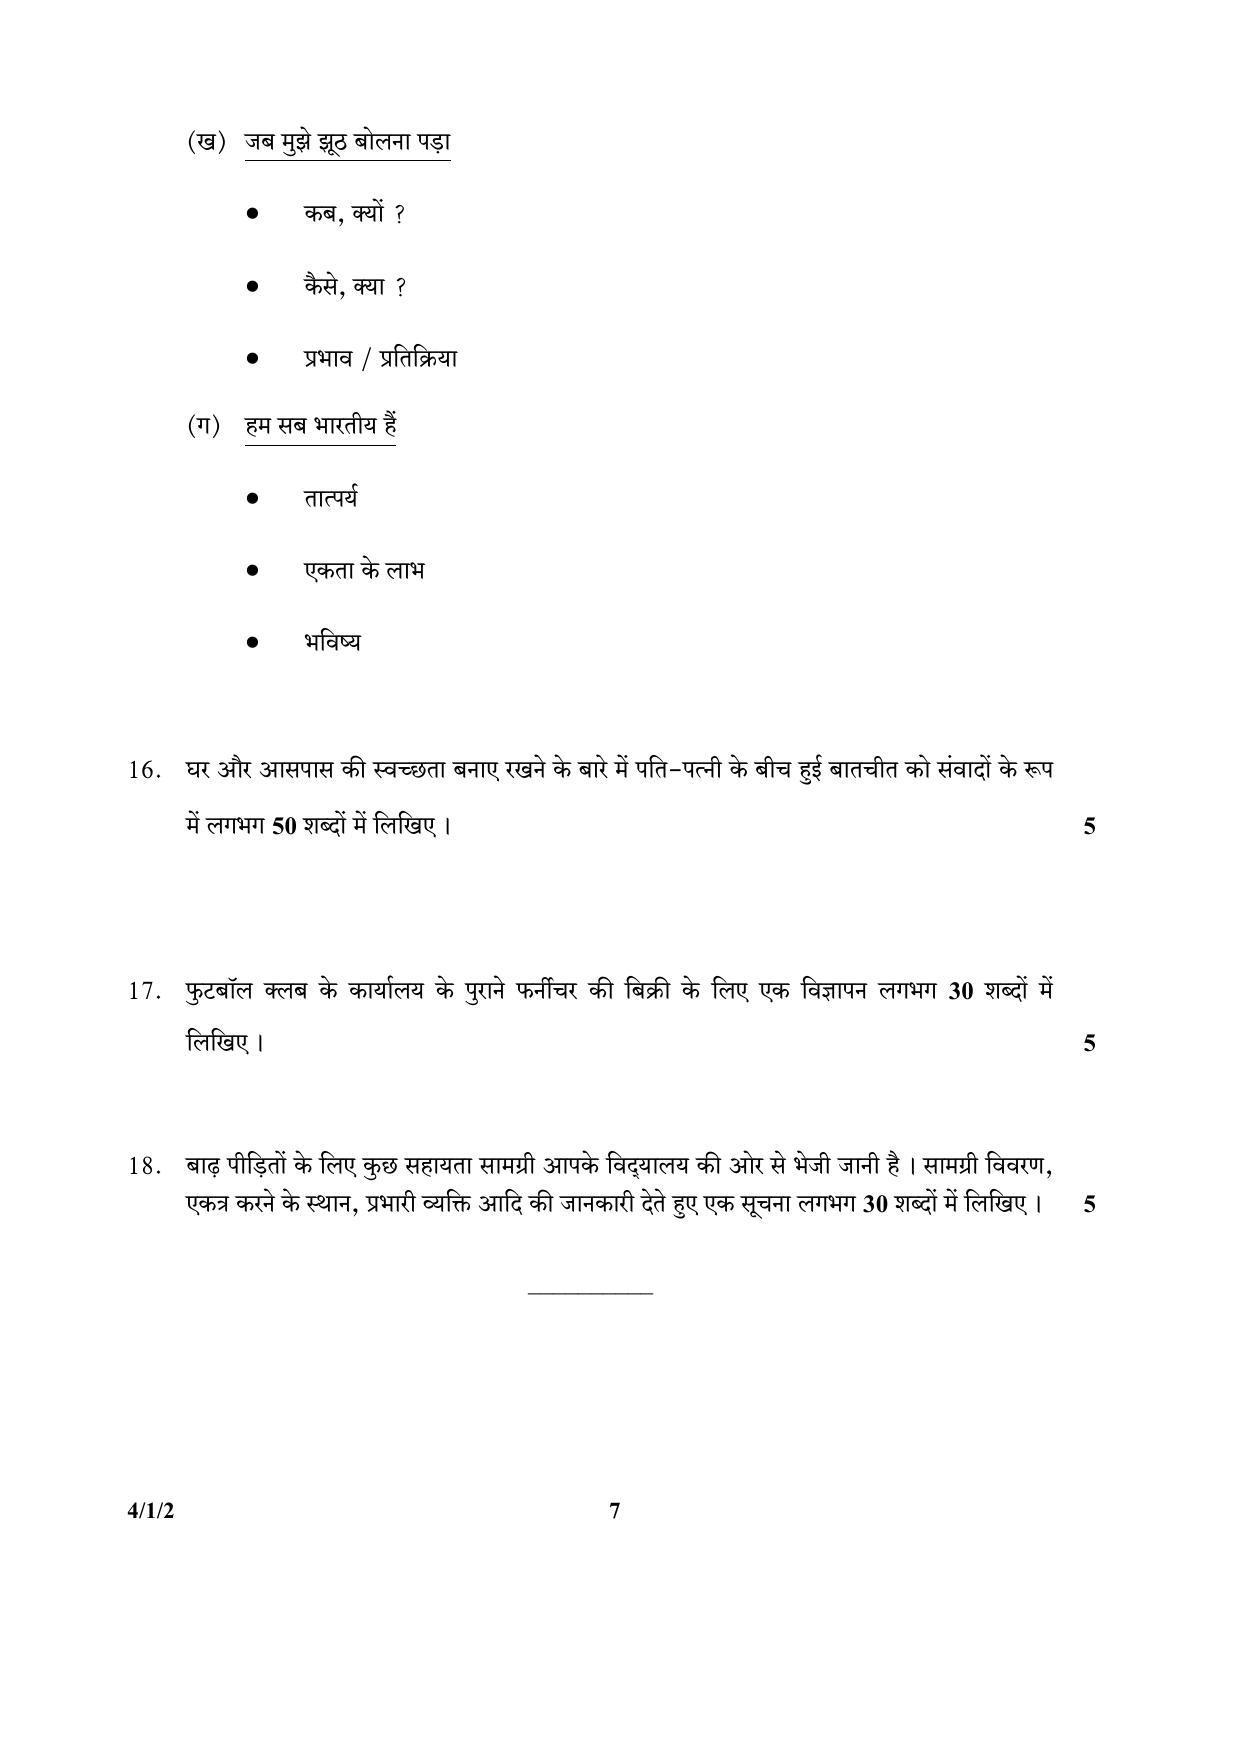 CBSE Class 10 4-1-2_Hindi 2017-comptt Question Paper - Page 7